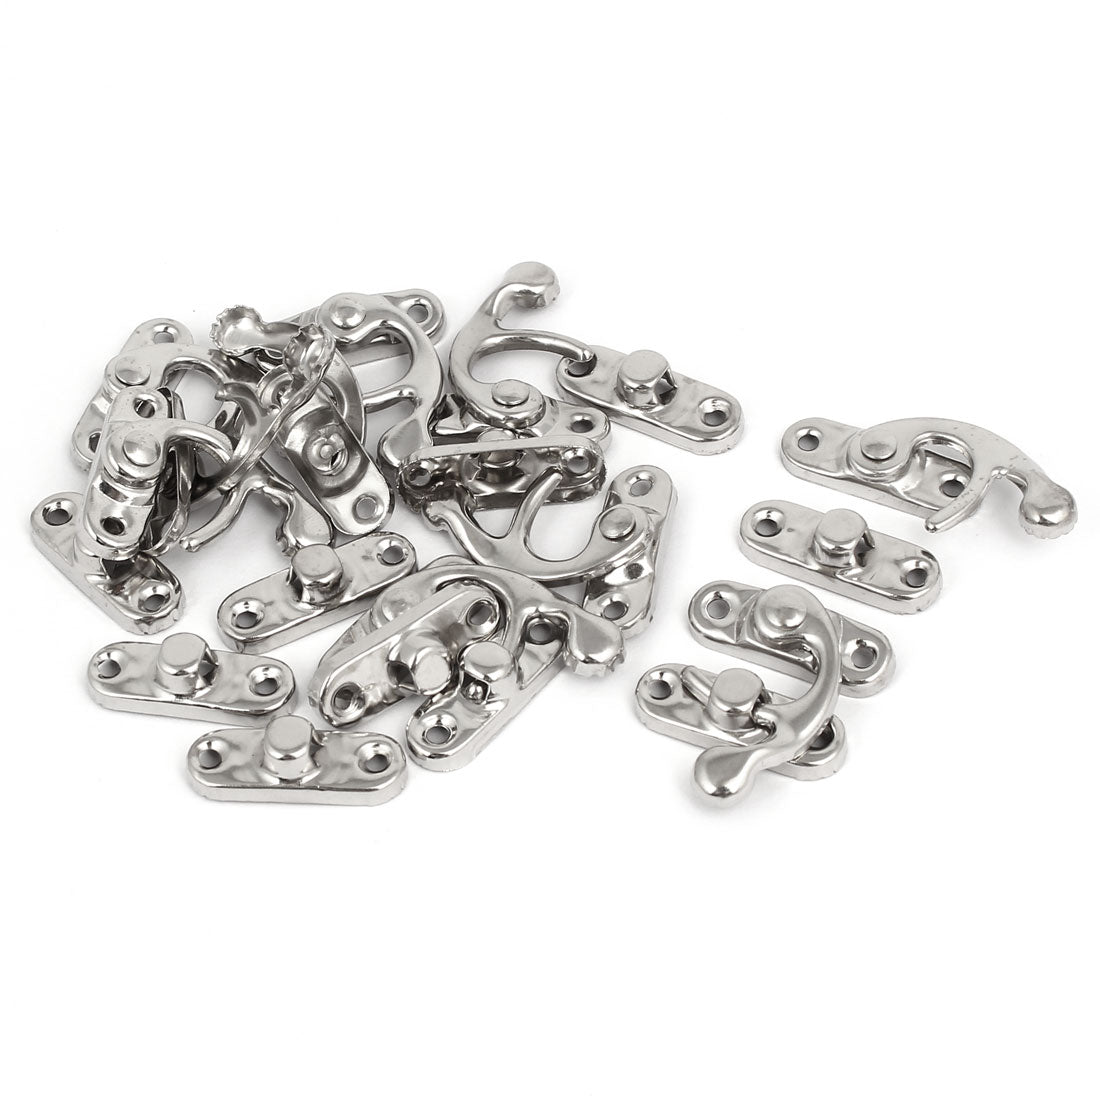 uxcell Uxcell Jewelry Box Right Swing Arm Clasp Latches Catch Toggle Hasp Silver Tone 10PCS